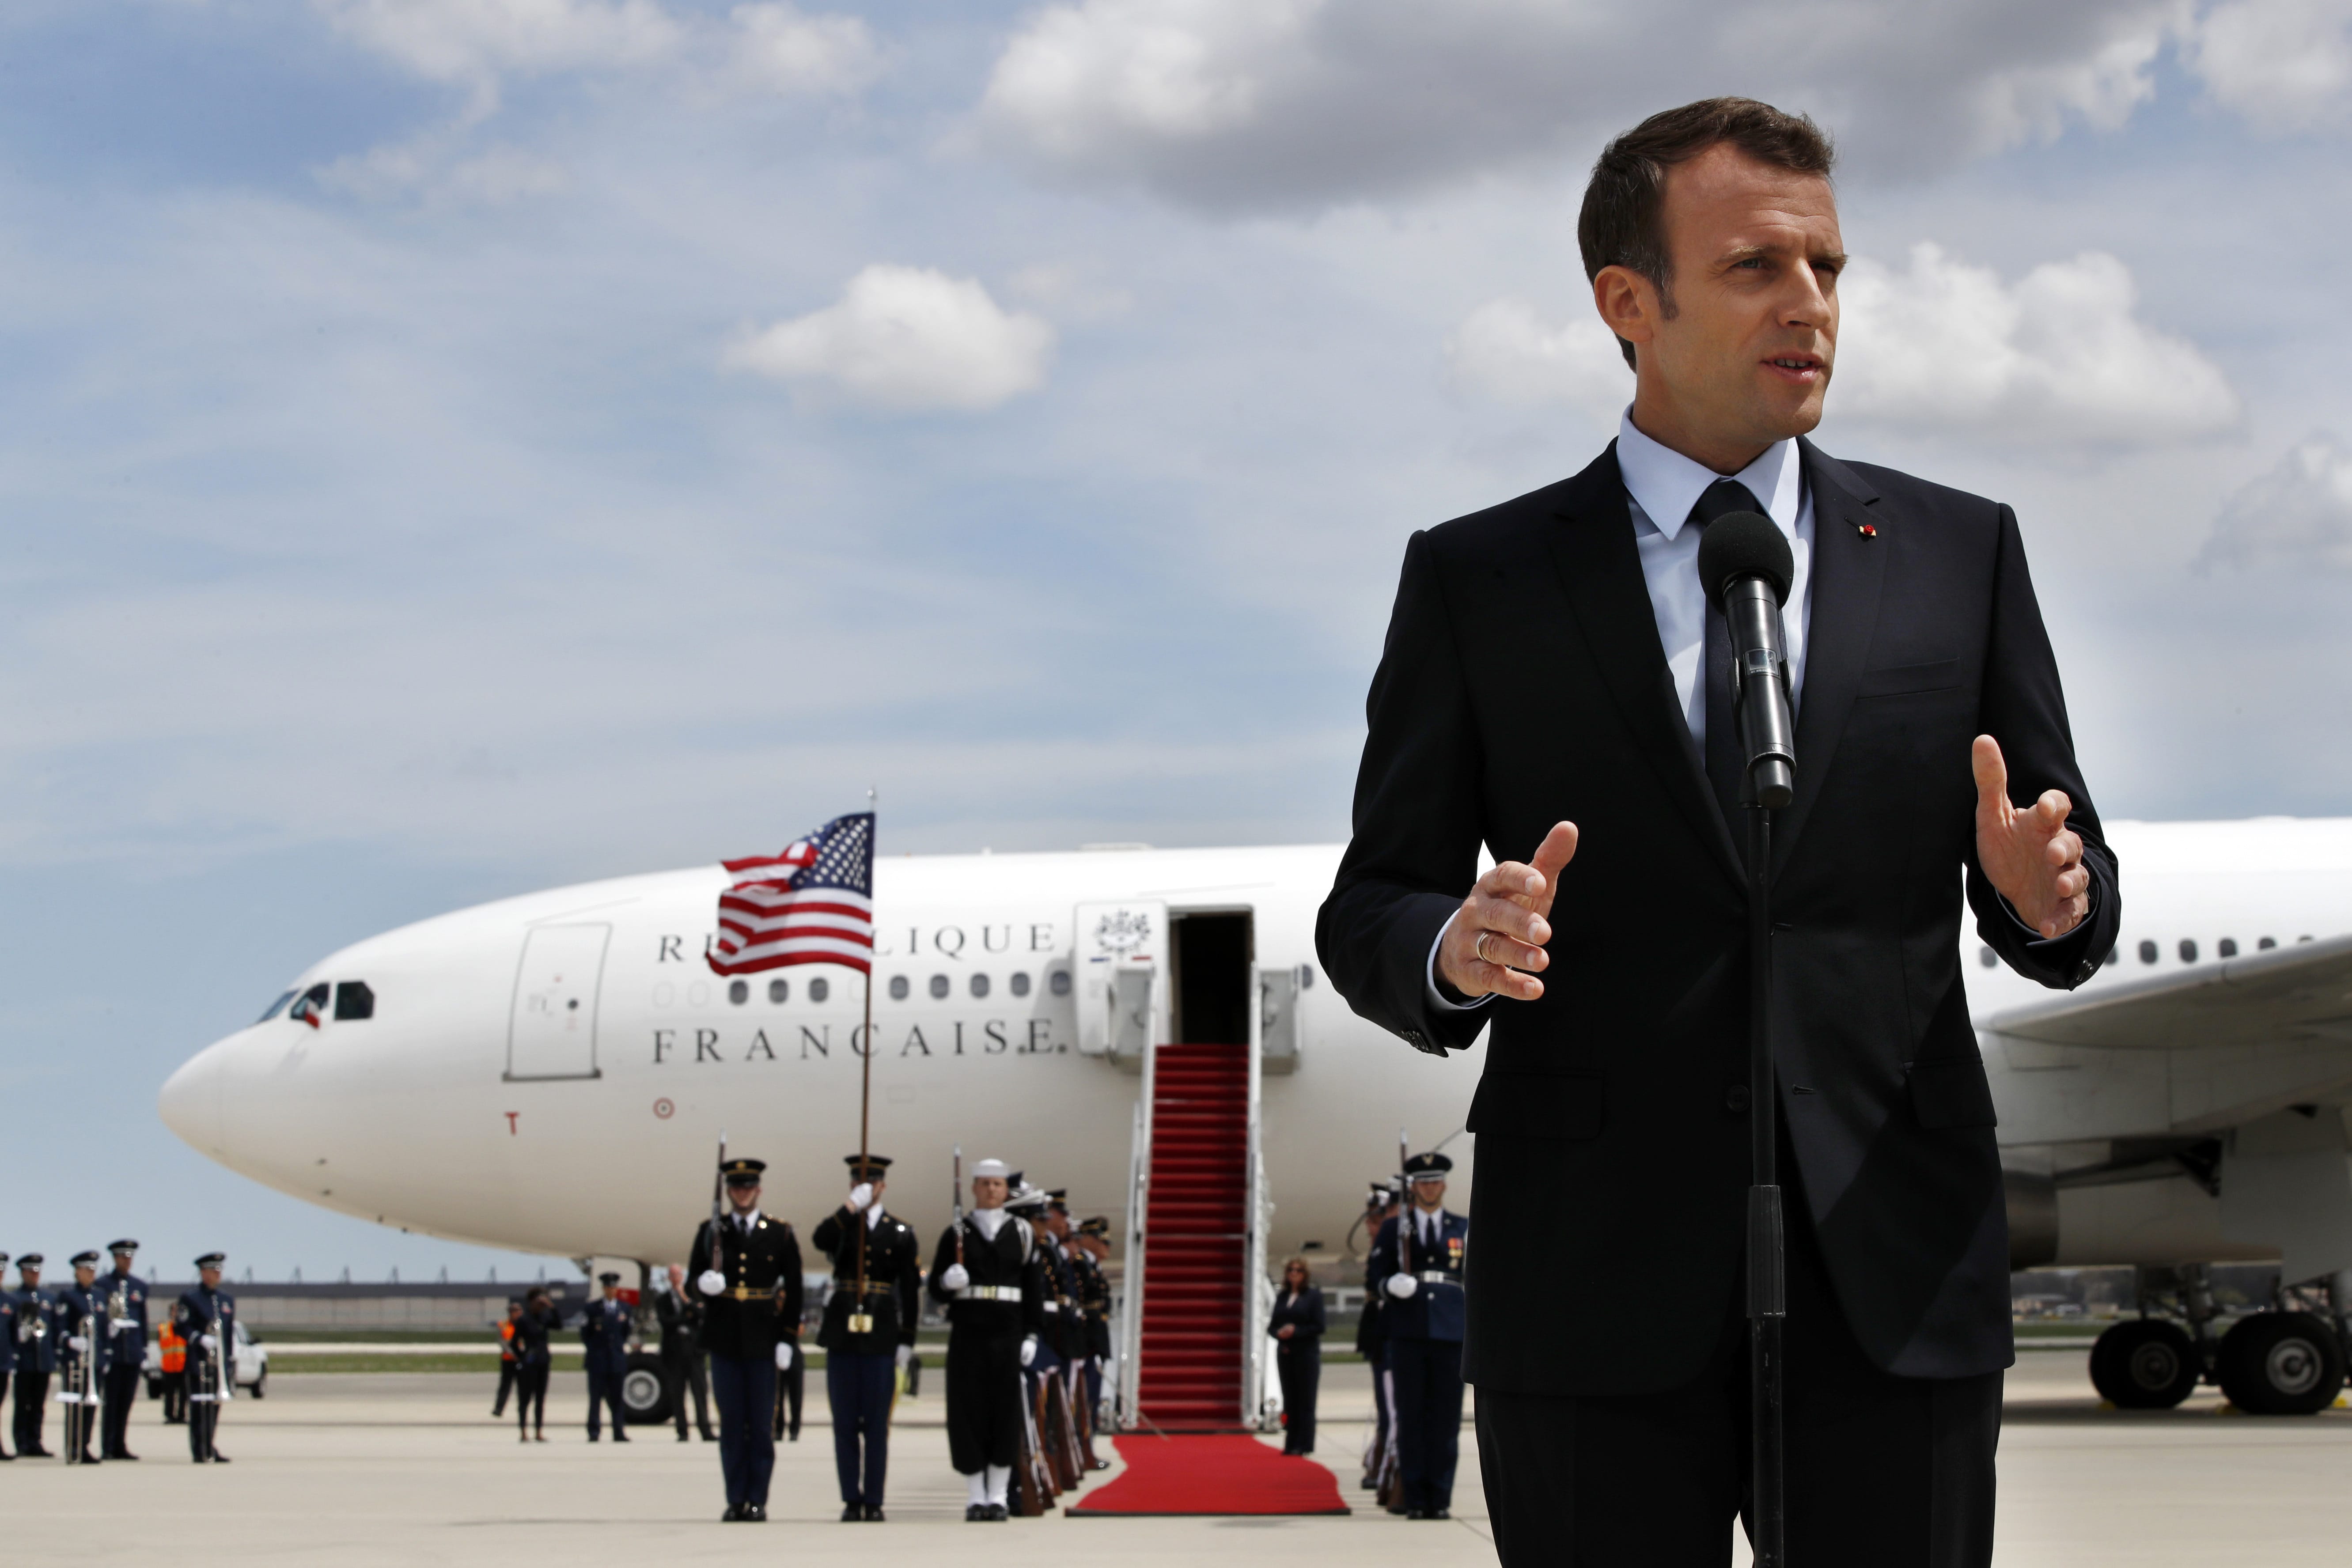 French President Emmanuel Macron speaksa on arrival at Andrews Air Force Base, Md., Monday April 23, 2018, outside of Washington. President Trump, celebrating nearly 250 years of U.S.-French relations, will be hosting Macron at a glitzy White House state visit.